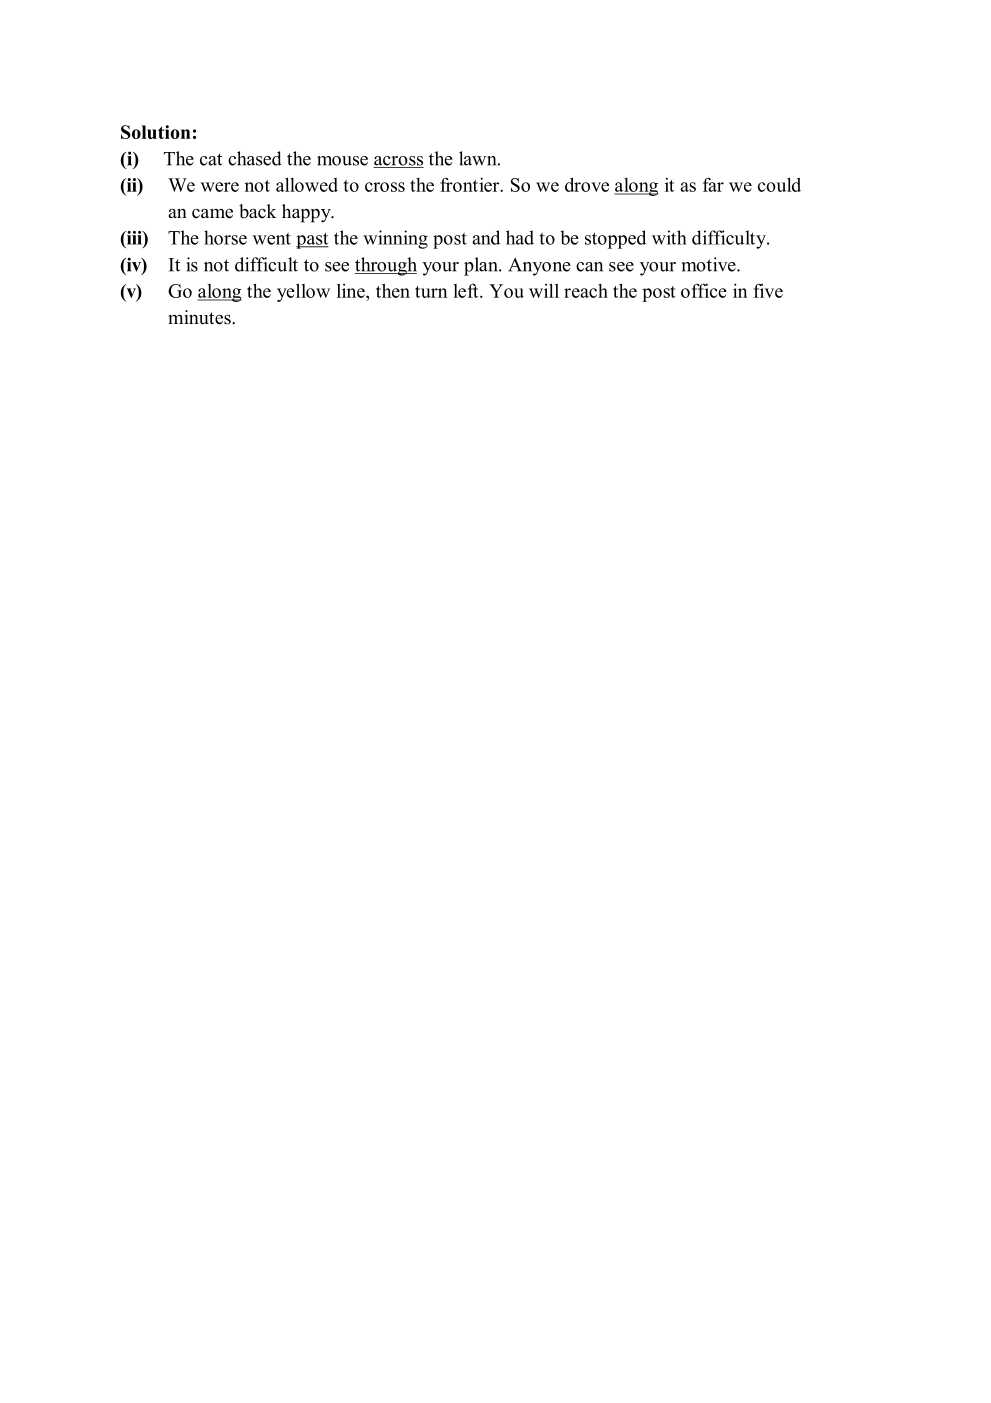 NCERT Solutions For Class 7 English Honeycomb Chapter 8 Fire Friend and Foe